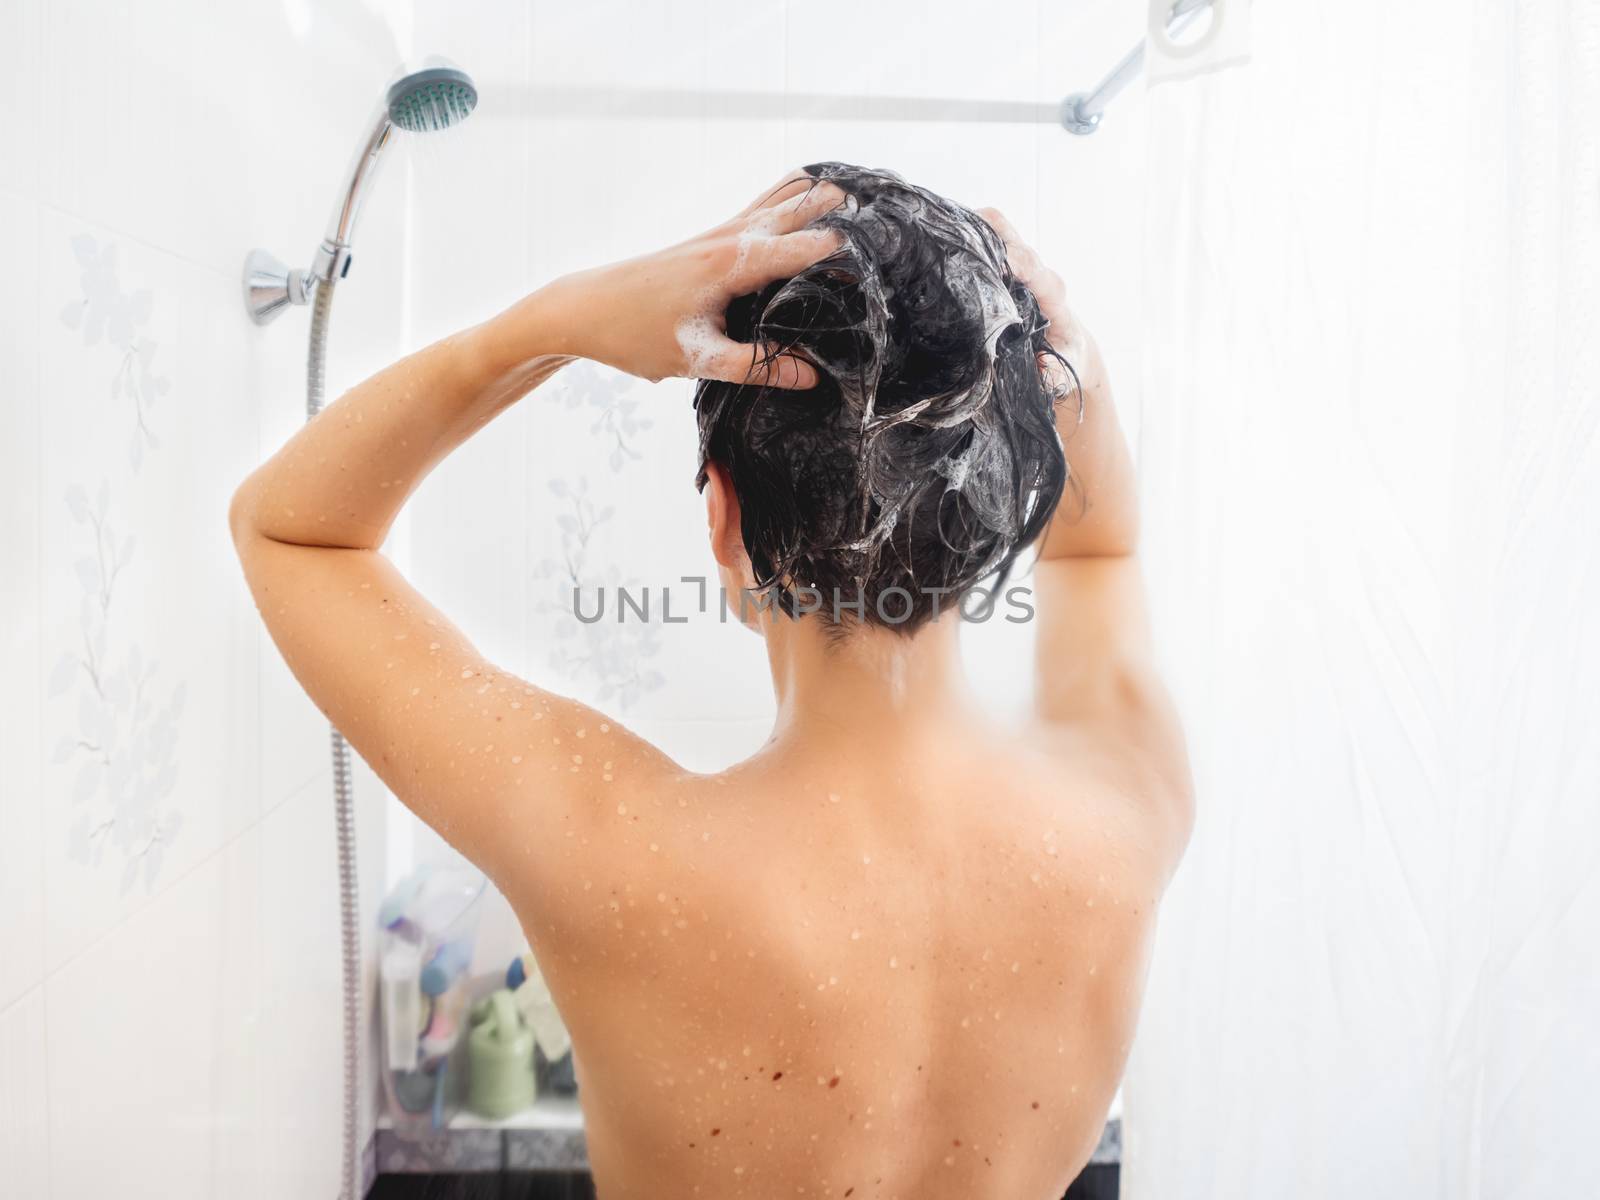 Naked woman with short hair takes a shower. Woman washes her hai by aksenovko